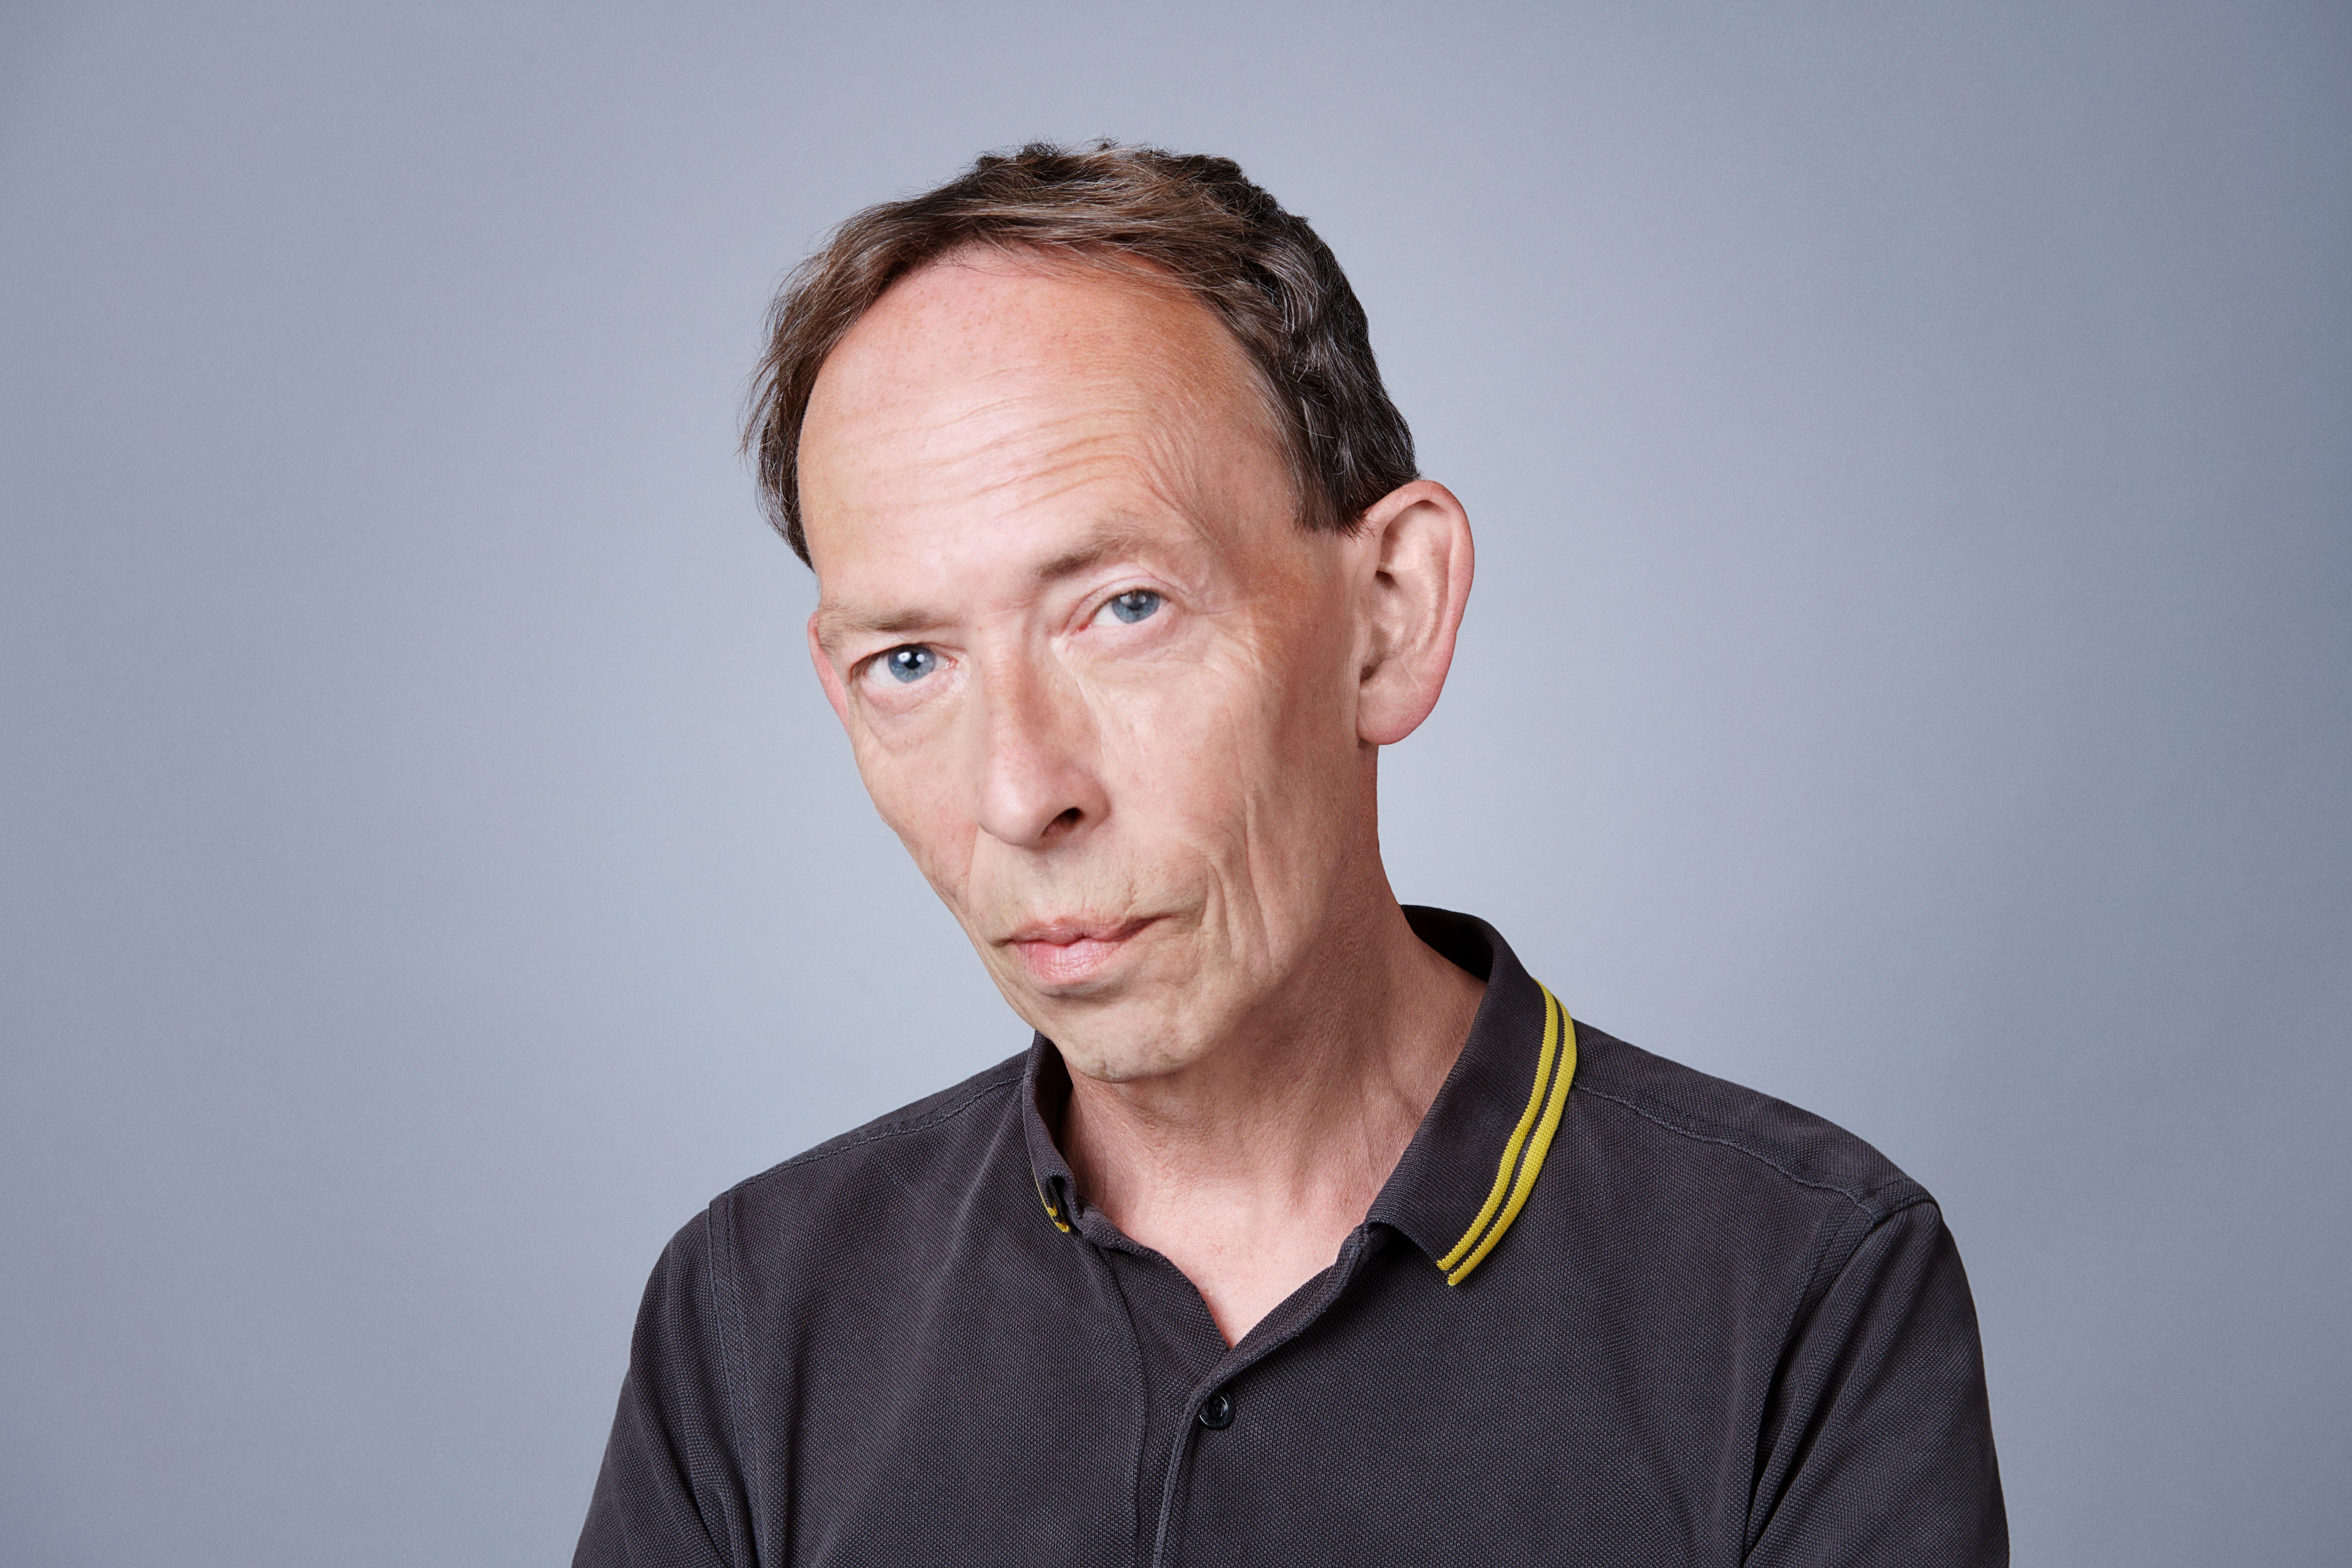 Steve Lamacq, BBC 6 Music presenter and chair of industry body LIVE